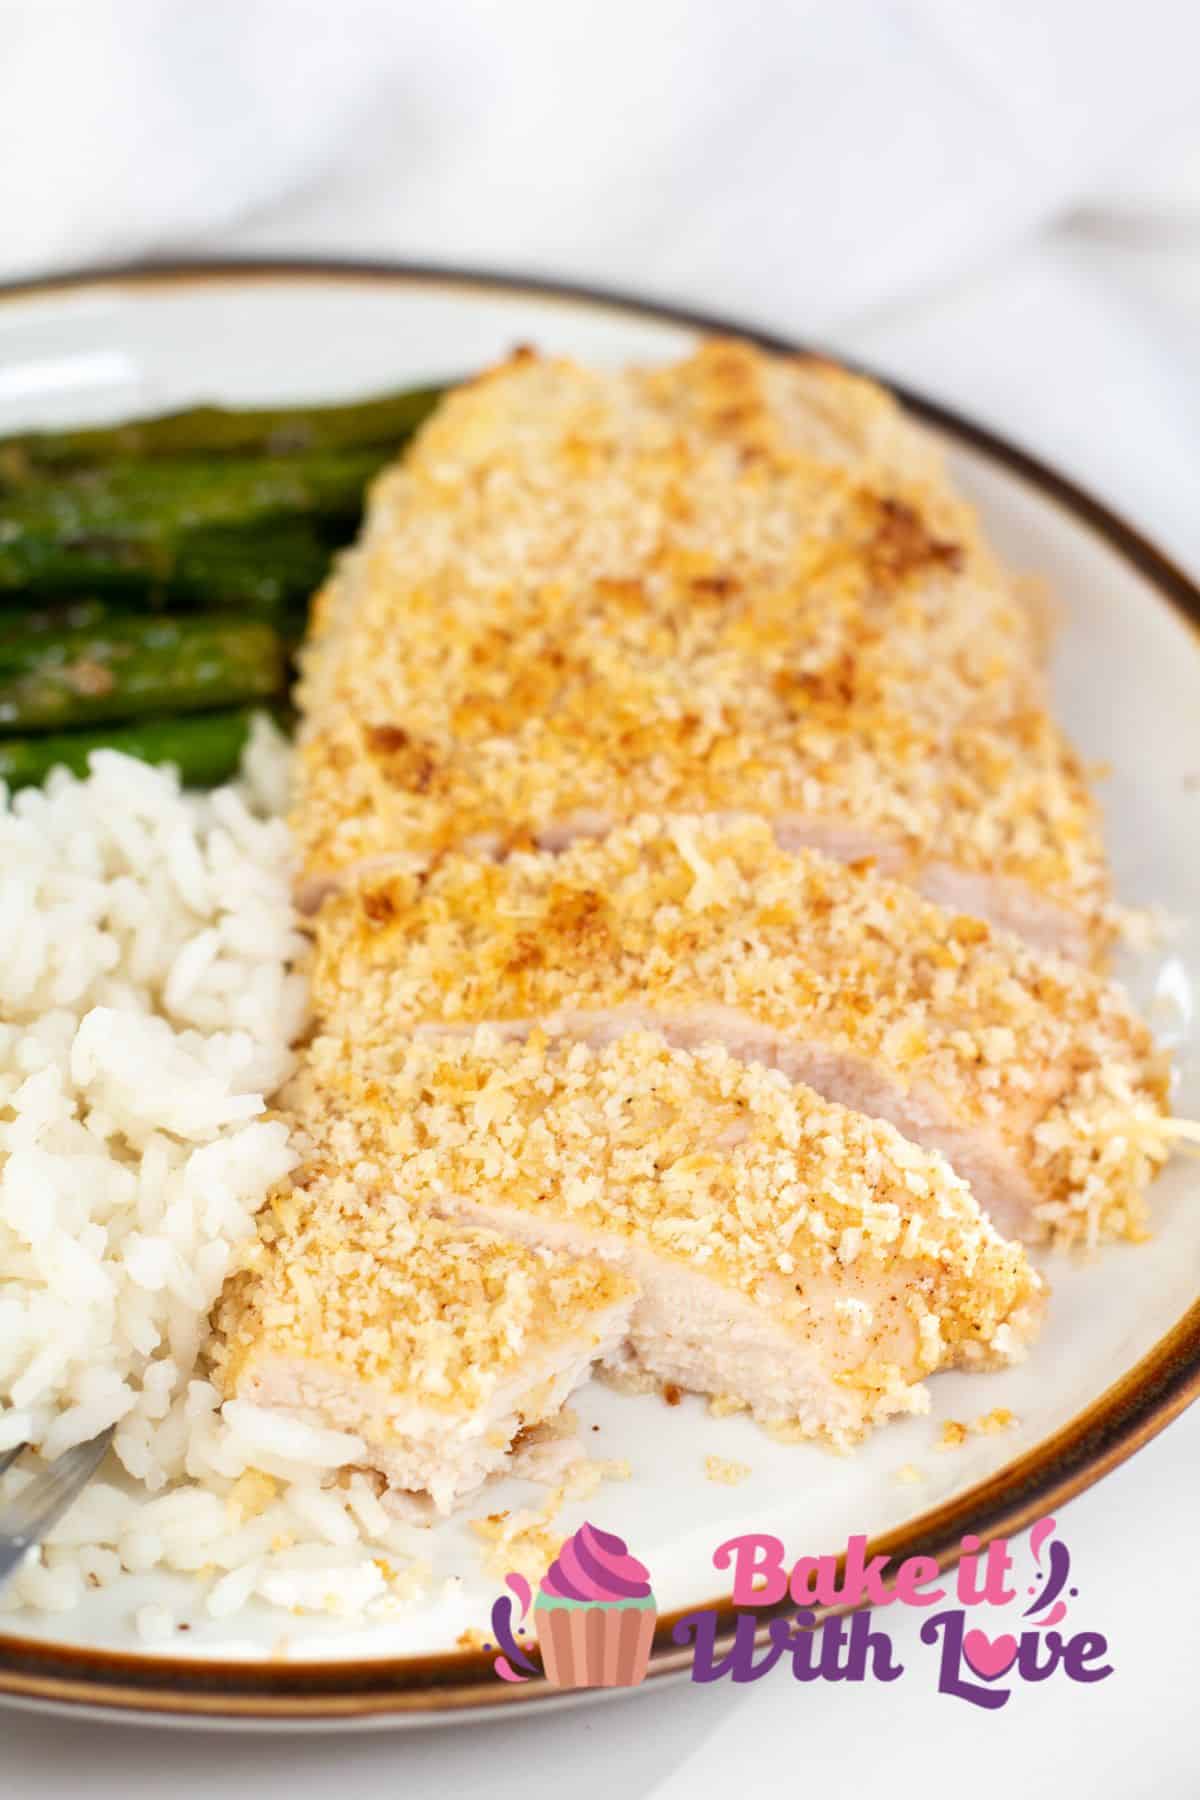 Tall image of baked panko chicken on a plate with rice and asparagus.